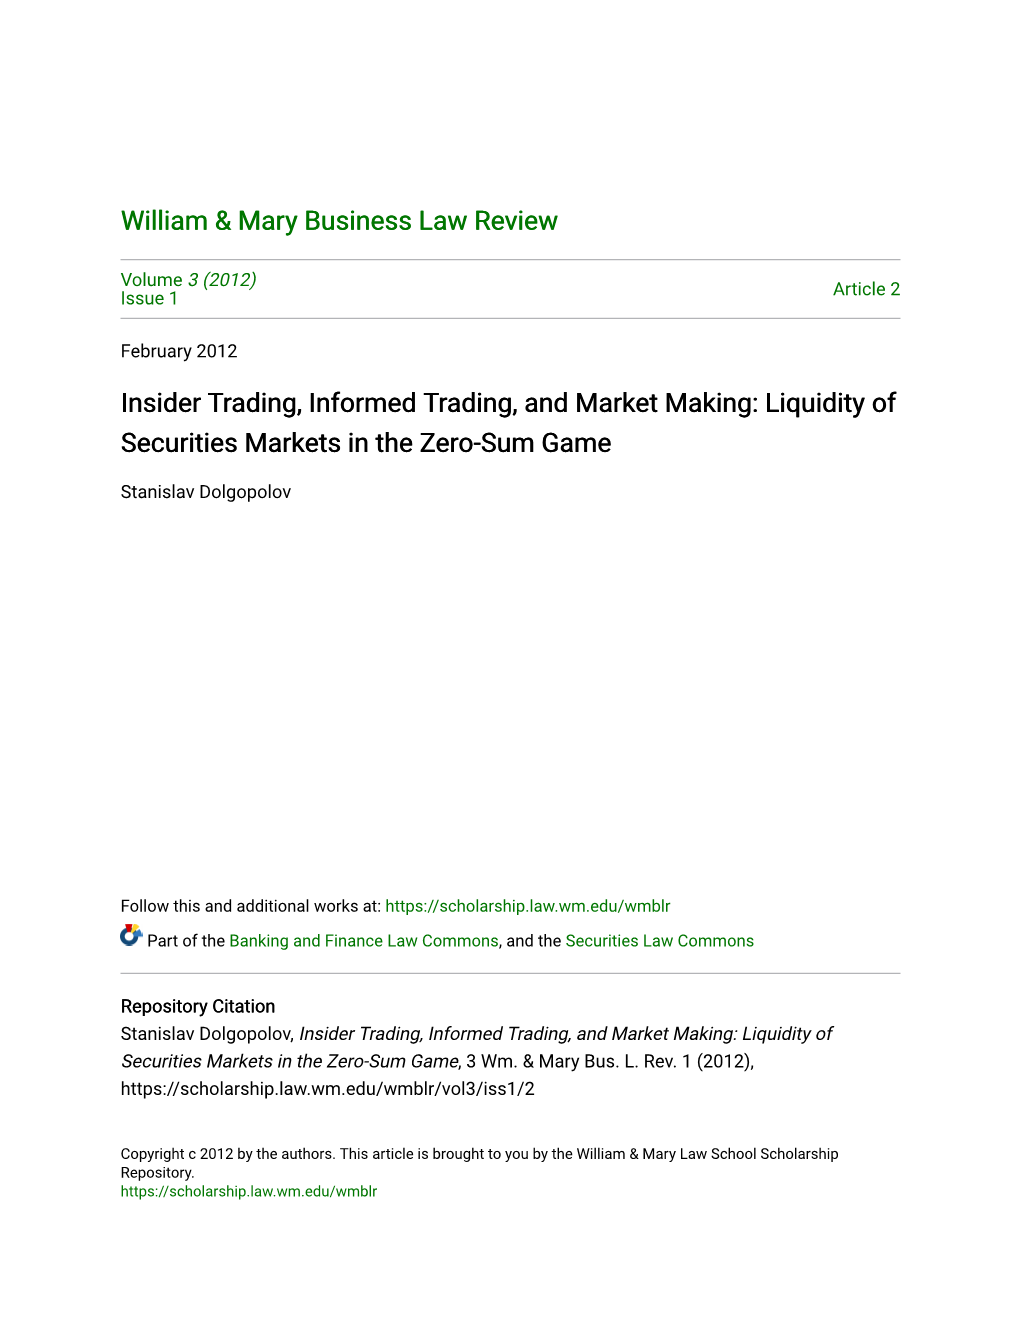 Insider Trading, Informed Trading, and Market Making: Liquidity of Securities Markets in the Zero-Sum Game